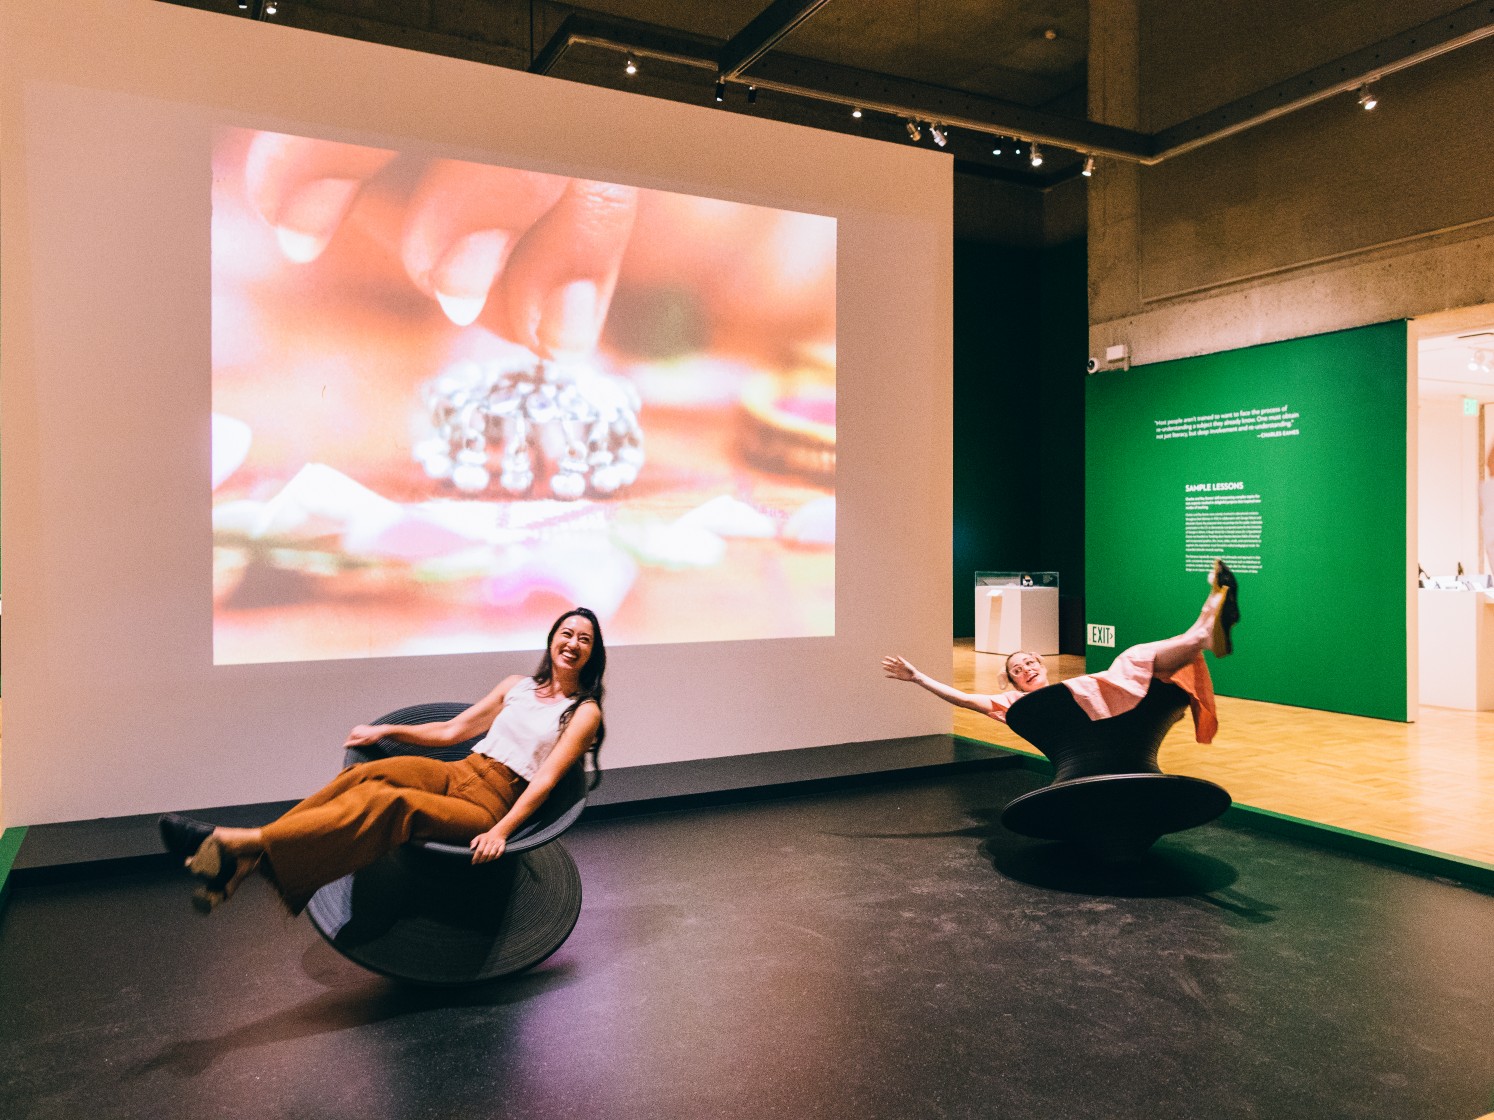 Erin Fong and Alexandra Bigley sit and spin in Magis Spun Chairs by Thomas Heatherwick as the Eames Tops film plays in the background. (Sothear Nuon)